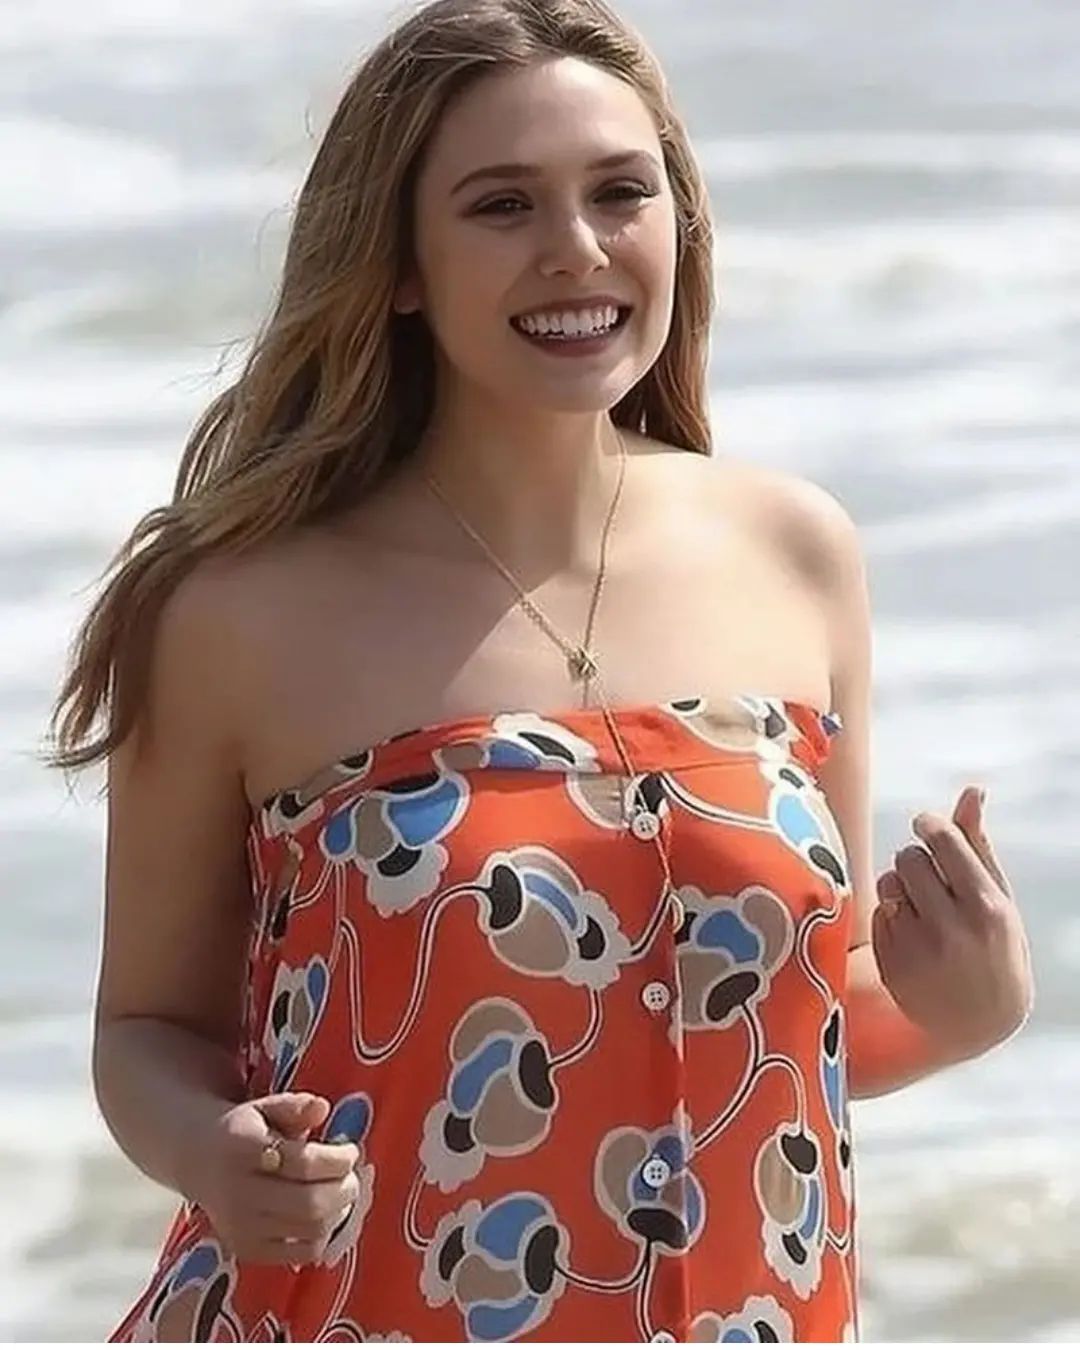 Elizabeth Olsen Biography: Age, Net Worth, Height, Instagram, Wiki, Parents, Spouse, Siblings, Movies, Awards